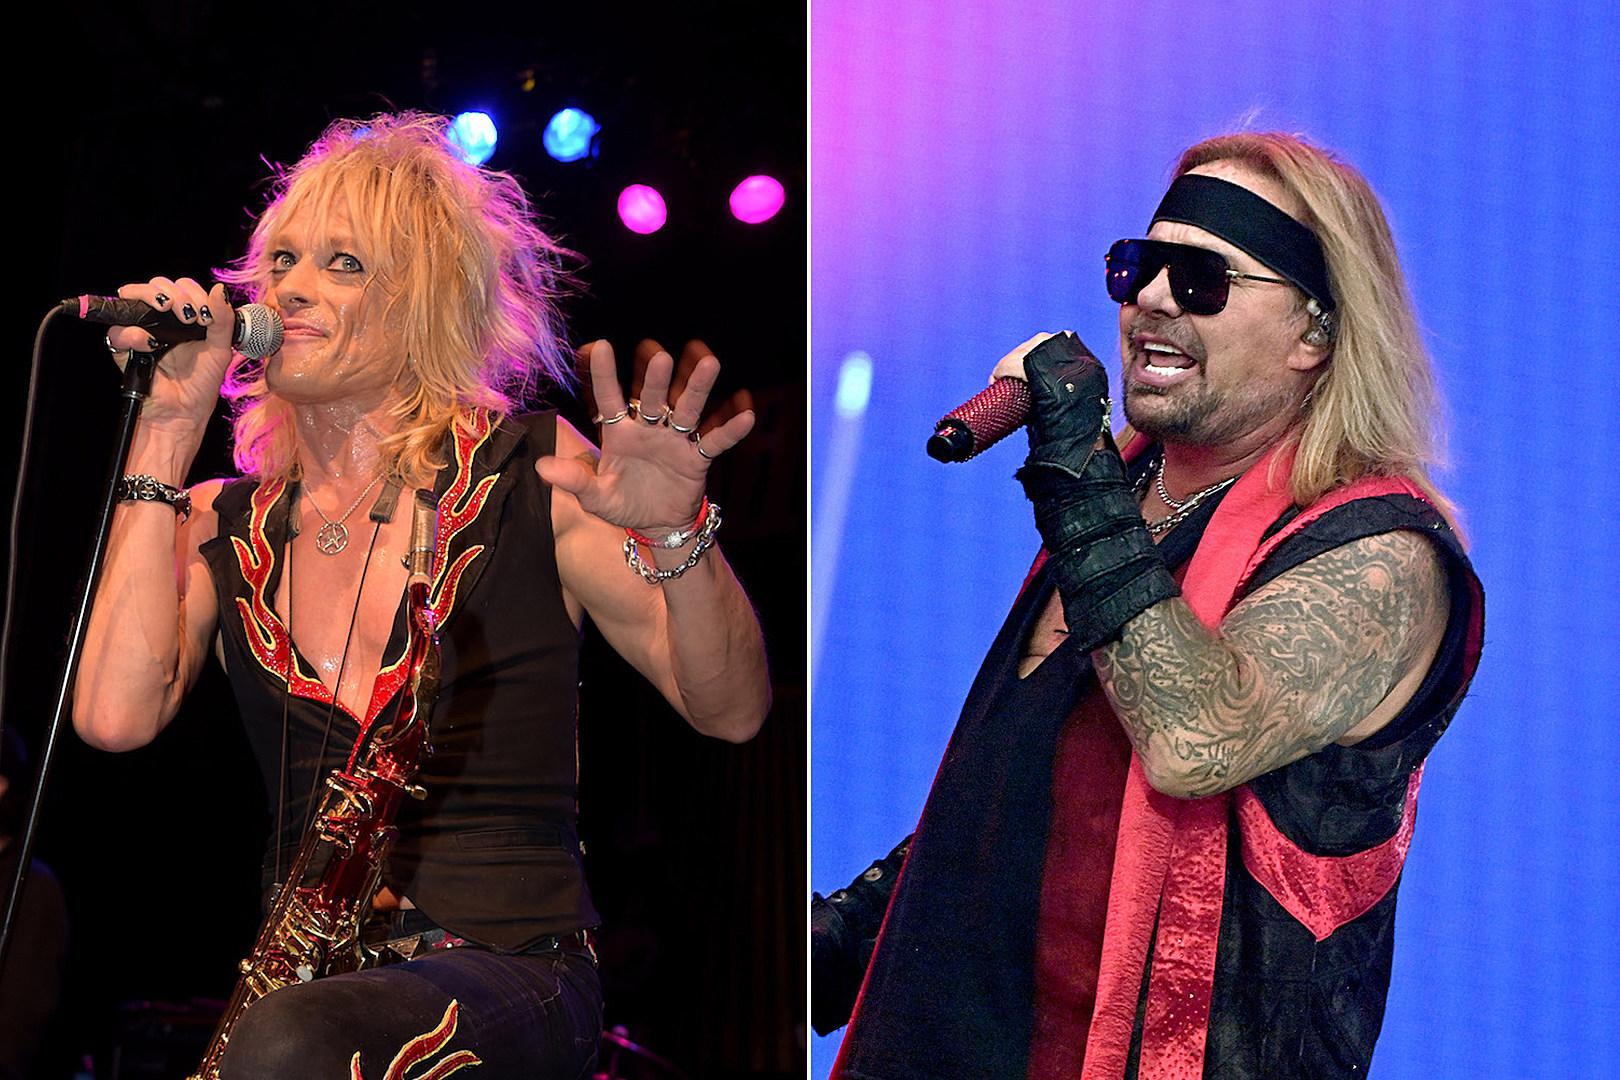 Michael Monroe Meets Vince Neil for First Time at Festival